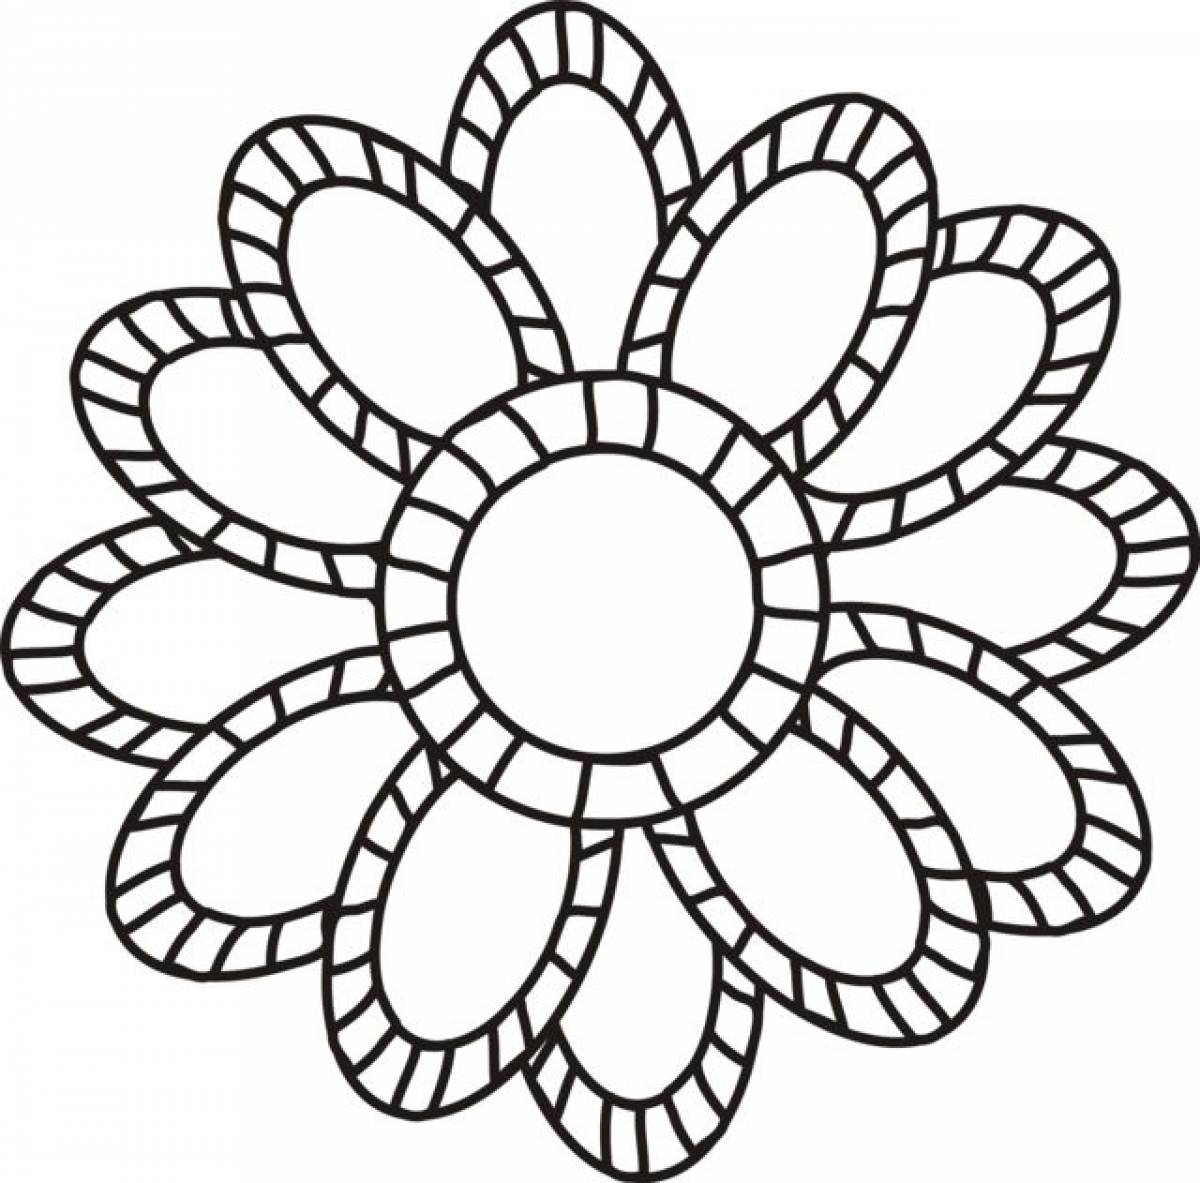 Flower with a pattern